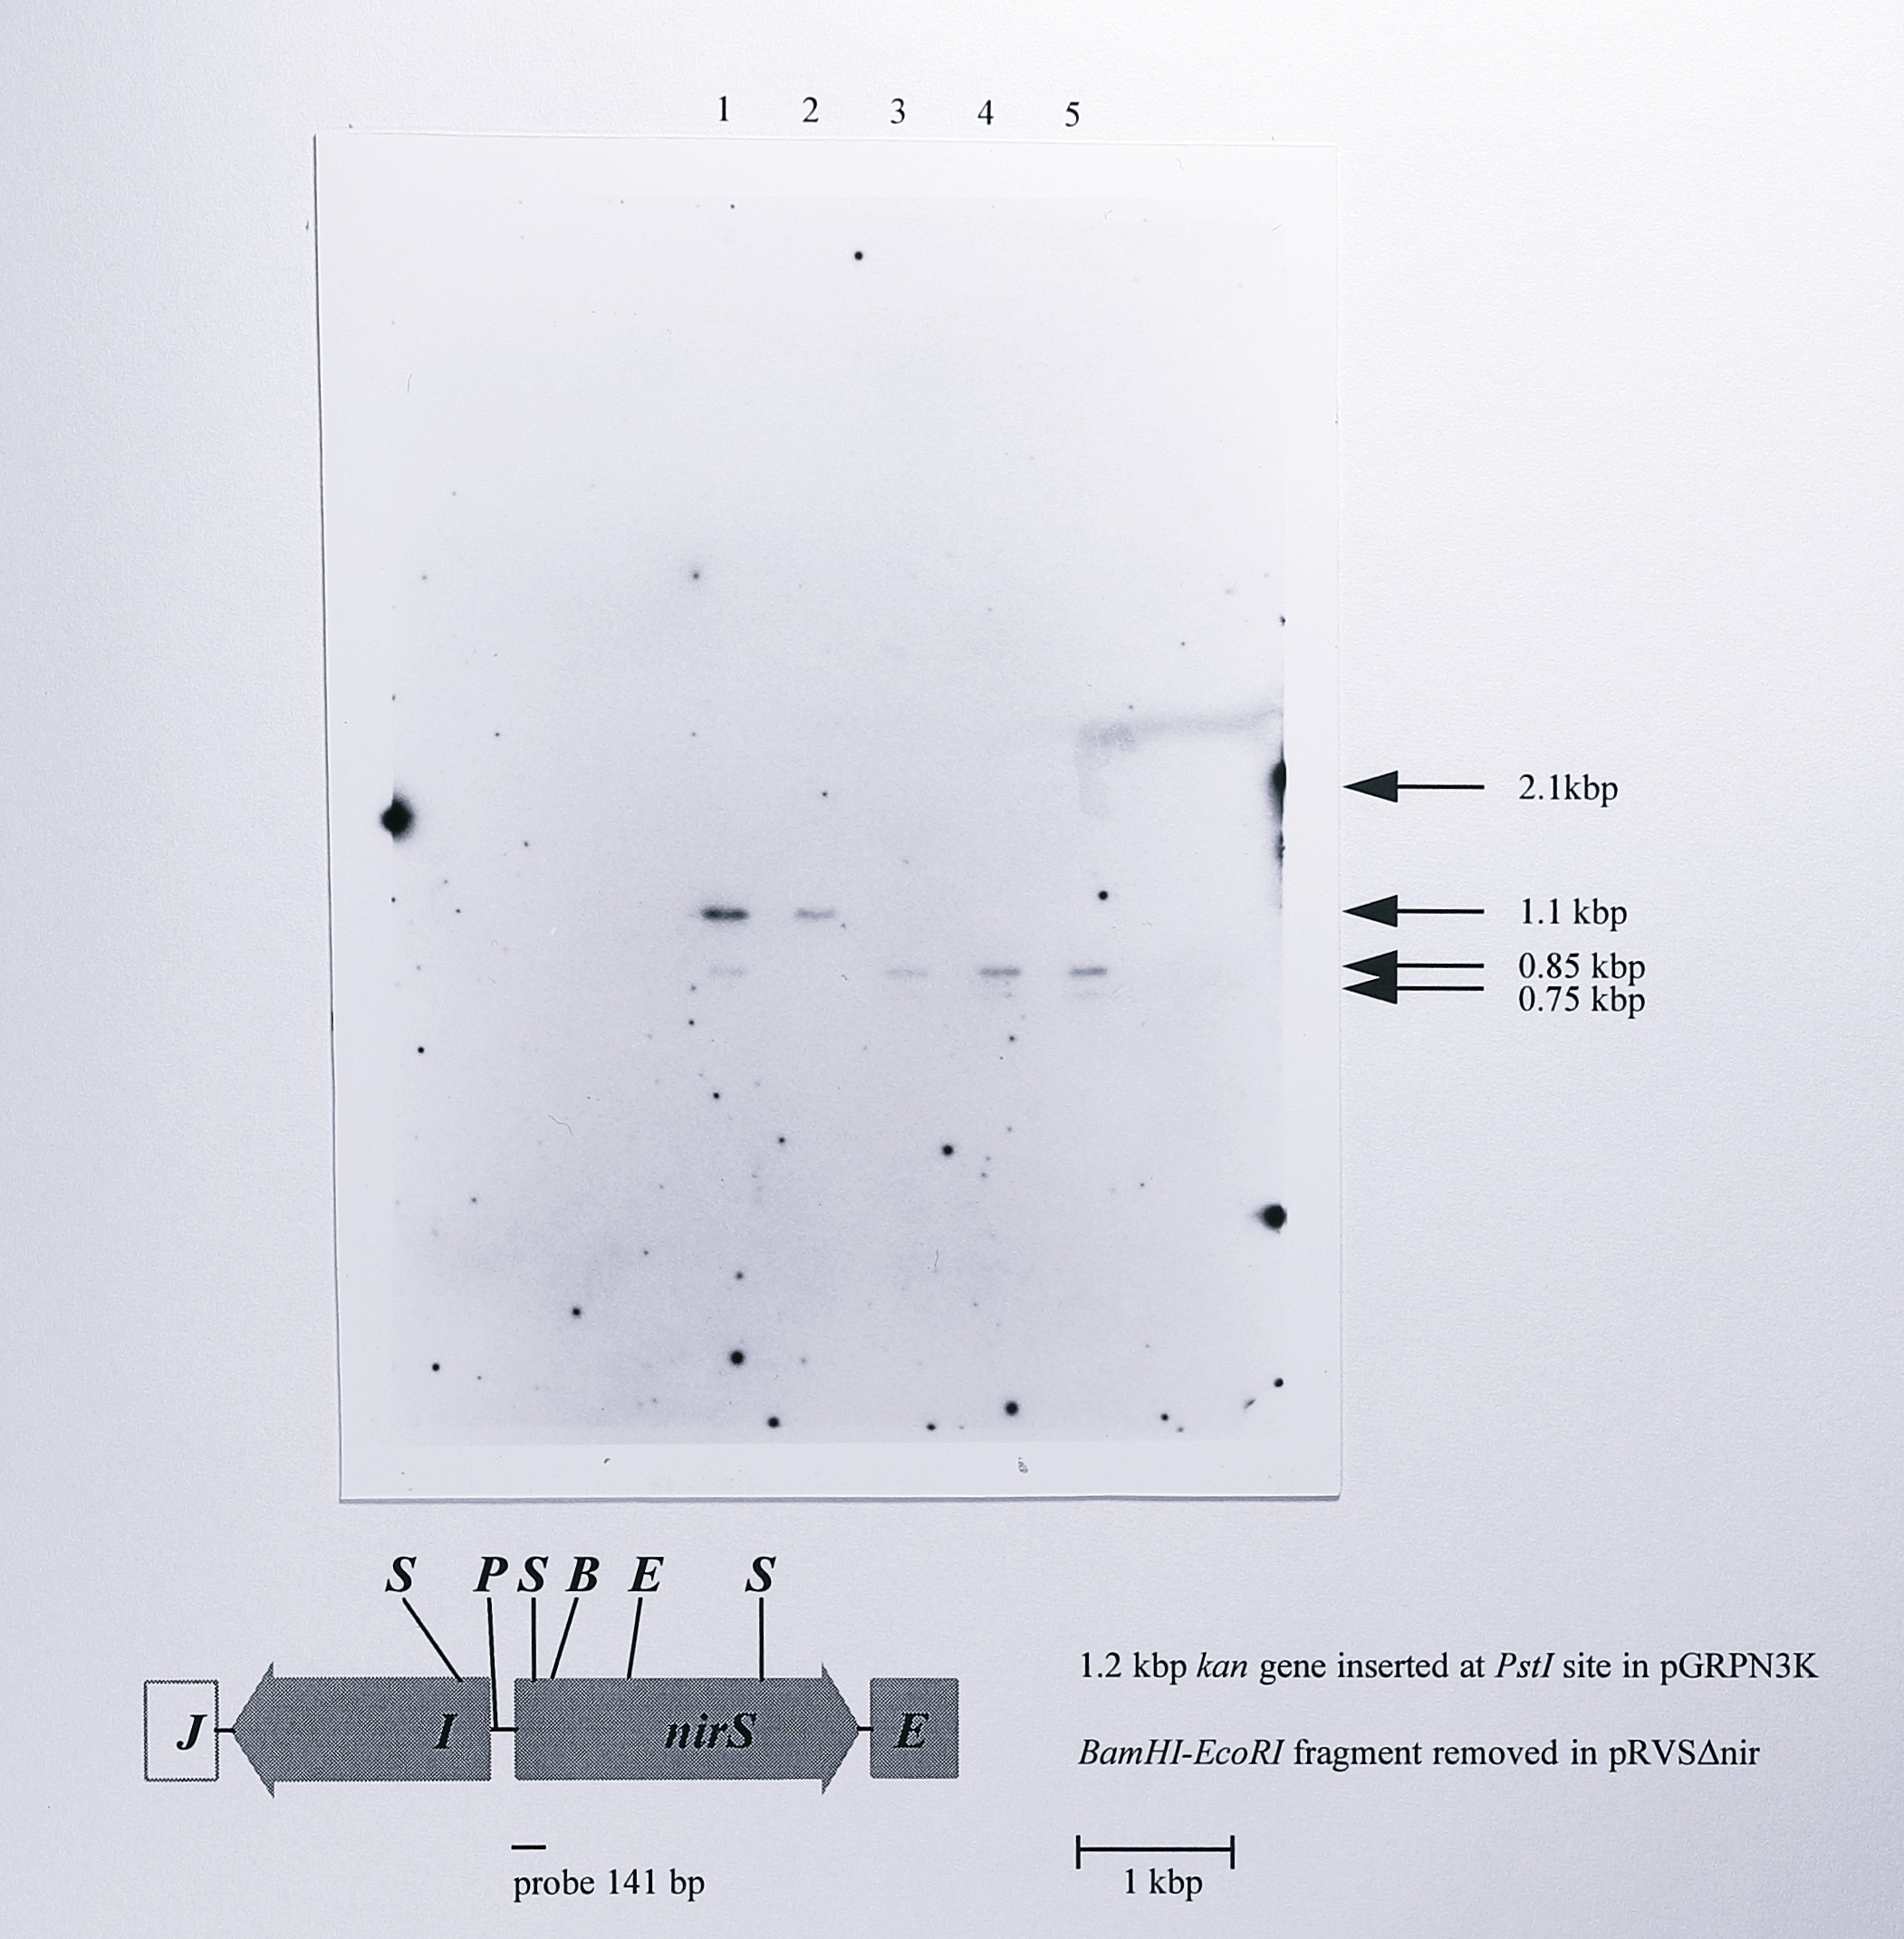 Southern blot of genomic DNA from wild-type _T. pantotropha_, _T. pantotropha_ K7 and the _nirS_ deletion mutants $\Delta5$, $\Delta7$ and $\Delta8$ using a _nirS_-derived probe. Genomic DNA was digested using _StyI_ and probed using a 141 bp PCR product derived from the _nirS_ gene using the primers nirSF and 228R (Table 3.1, Chapter 3), labelled with digoxigenin-alkaline phosphatase conjugate. The map below the blot indicates the _StyI_ sites in the 4.2 kbp _NotI_ fragment in which the deletion was made to give pRVS$\Delta$nir. All of the expected fragments are visible on the blot except for the 2.1 kbp fragment in the insertion mutant strain; the larger size of this fragment and the small degree of overlap of the probe resulted in a very weak hybridisation that was barely visible on the original blot and cannot be seen on the photograph. The position of the 2.1 kbp fragment is indicated at the right of the gel, along with the other fragments. Lanes: 1, _T. pantotropha_ wild-type, 2, _T. pantotropha_ K7, 3-5, _T. pantotropha_ $\Delta5$, $\Delta7$ and $\Delta8$. Enzymes: S, _StyI_, P, _PstI_, B, _BamHI_, E, _EcoRI_